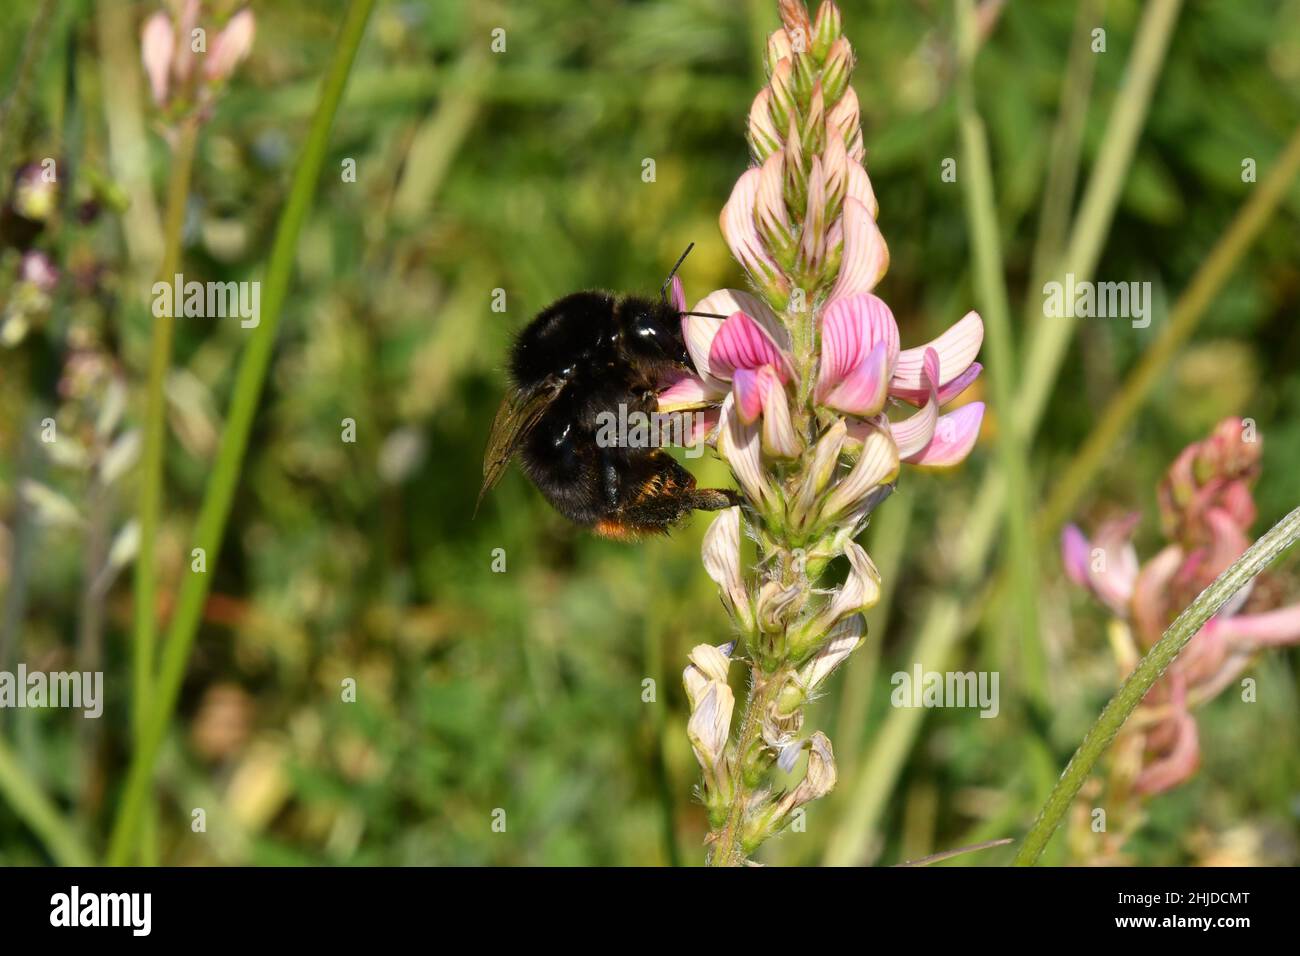 A Bumble Bee extracting nectar from a Sainfoin 'Onobrychis vicifolia'pollinating the flower at the same time.Sainfoin is grown as a forage crop on lim Stock Photo